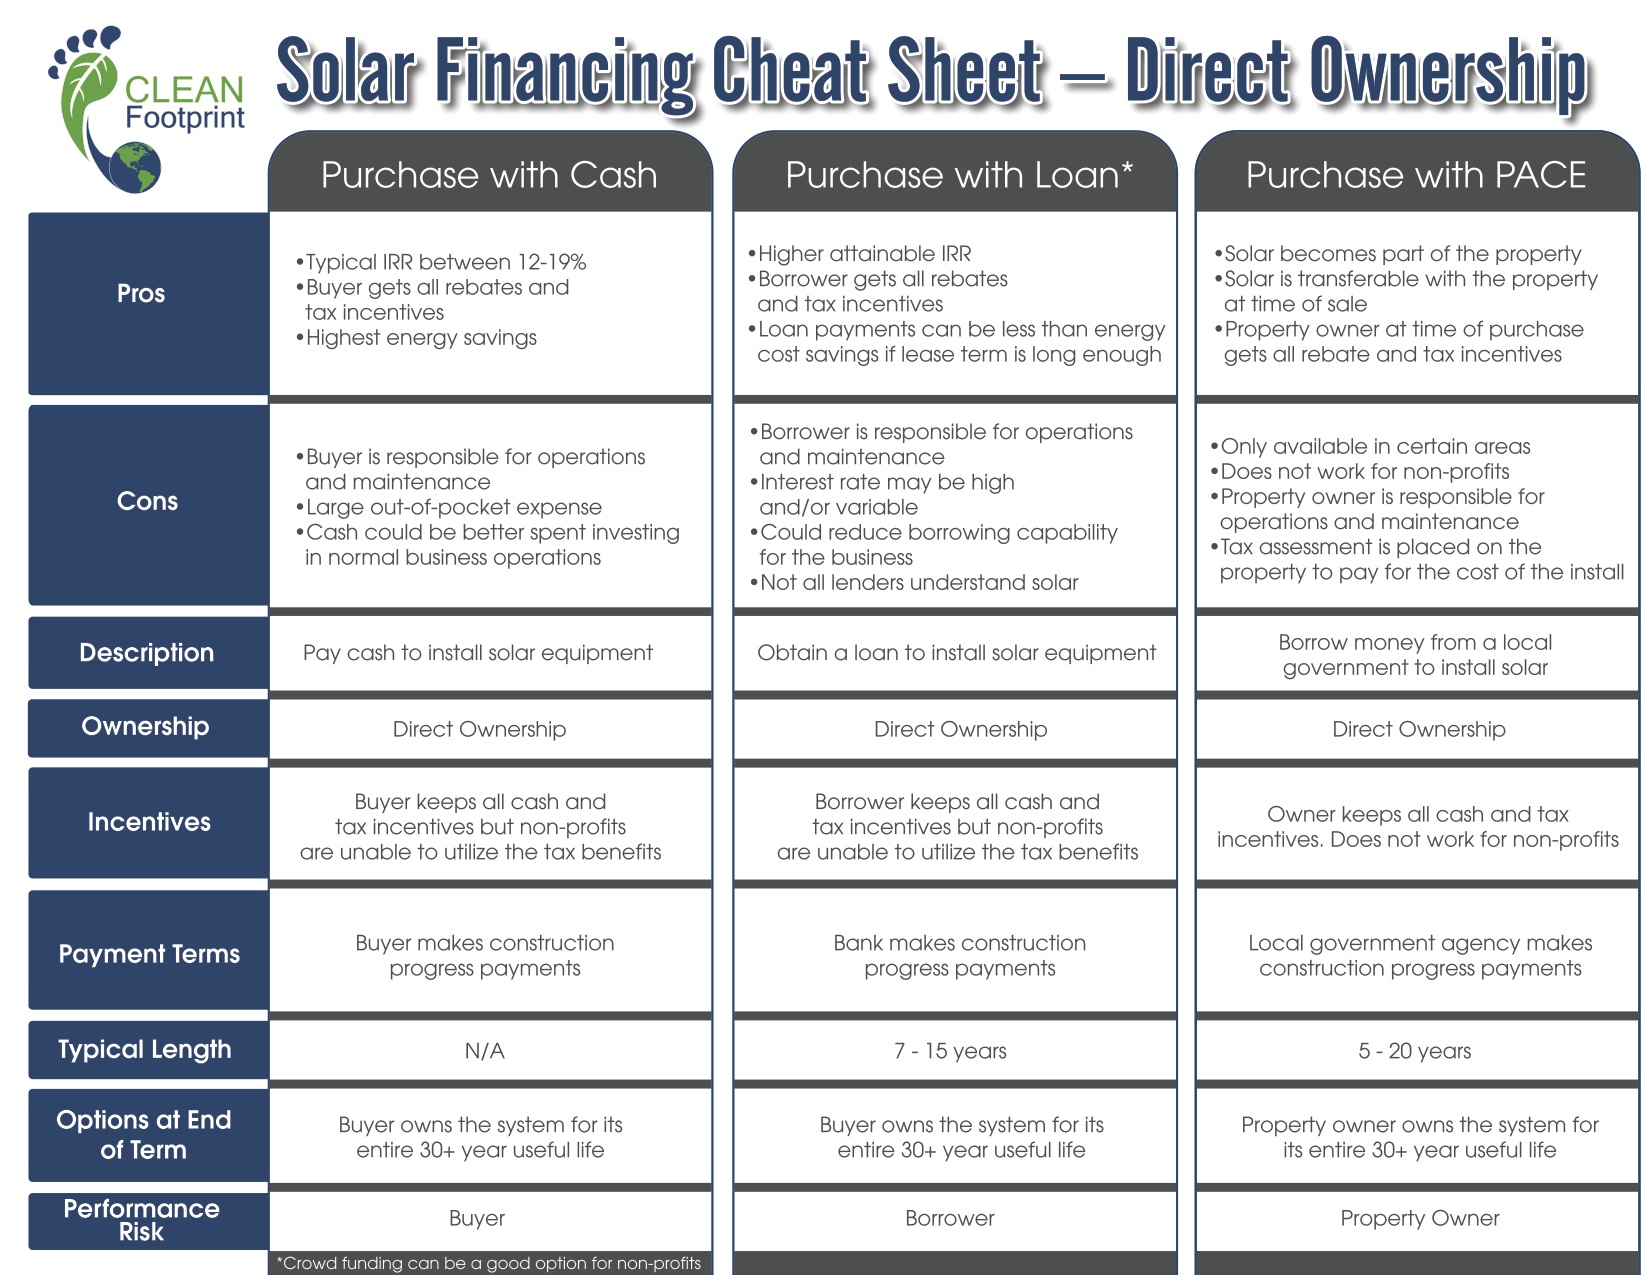 Solar-Financing-Direct-Ownership